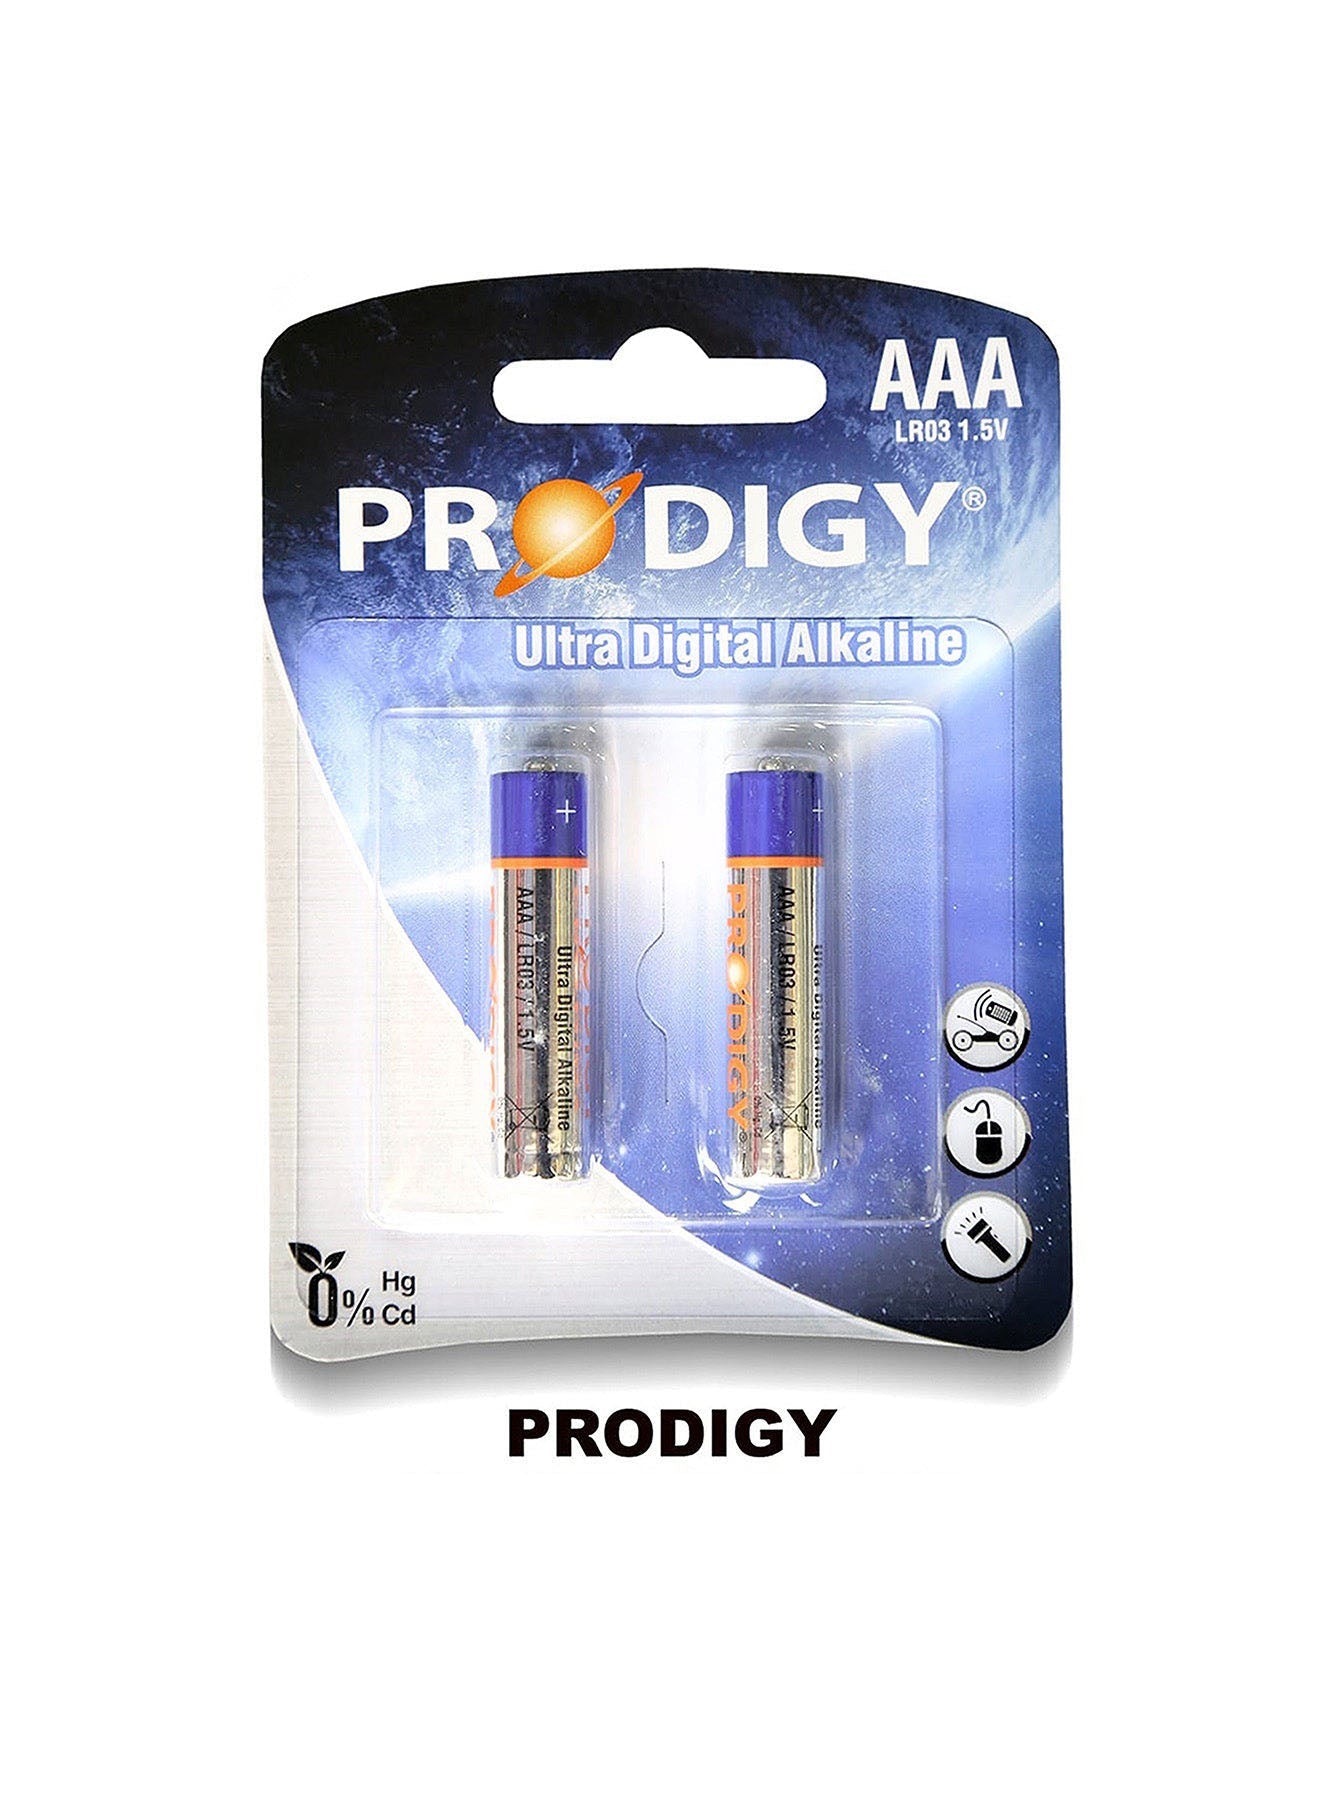 Prodigy Alkaline LR03UD AAA2 Value Pack of 2 